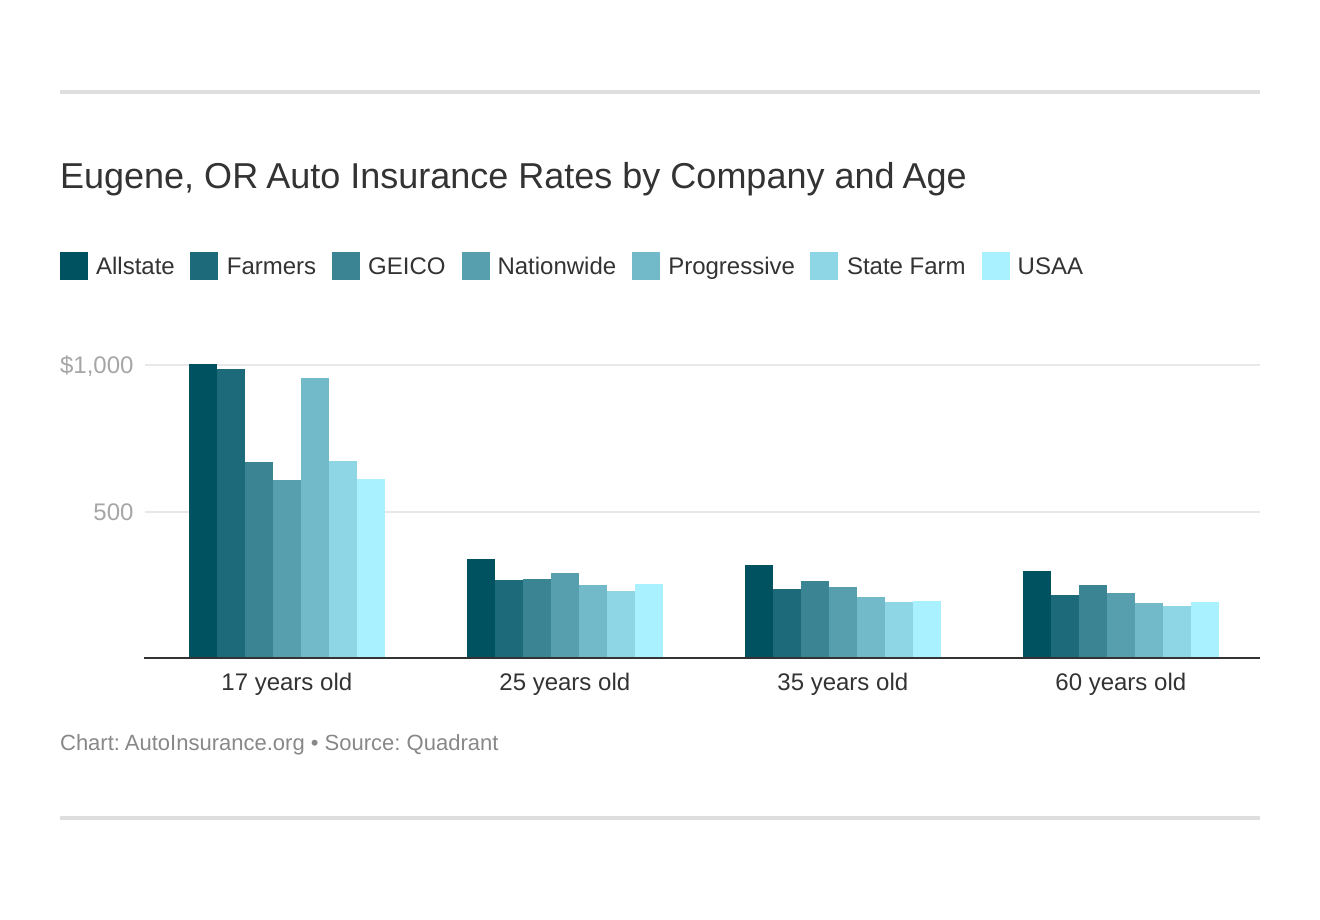 Eugene, OR Auto Insurance Rates by Company and Age